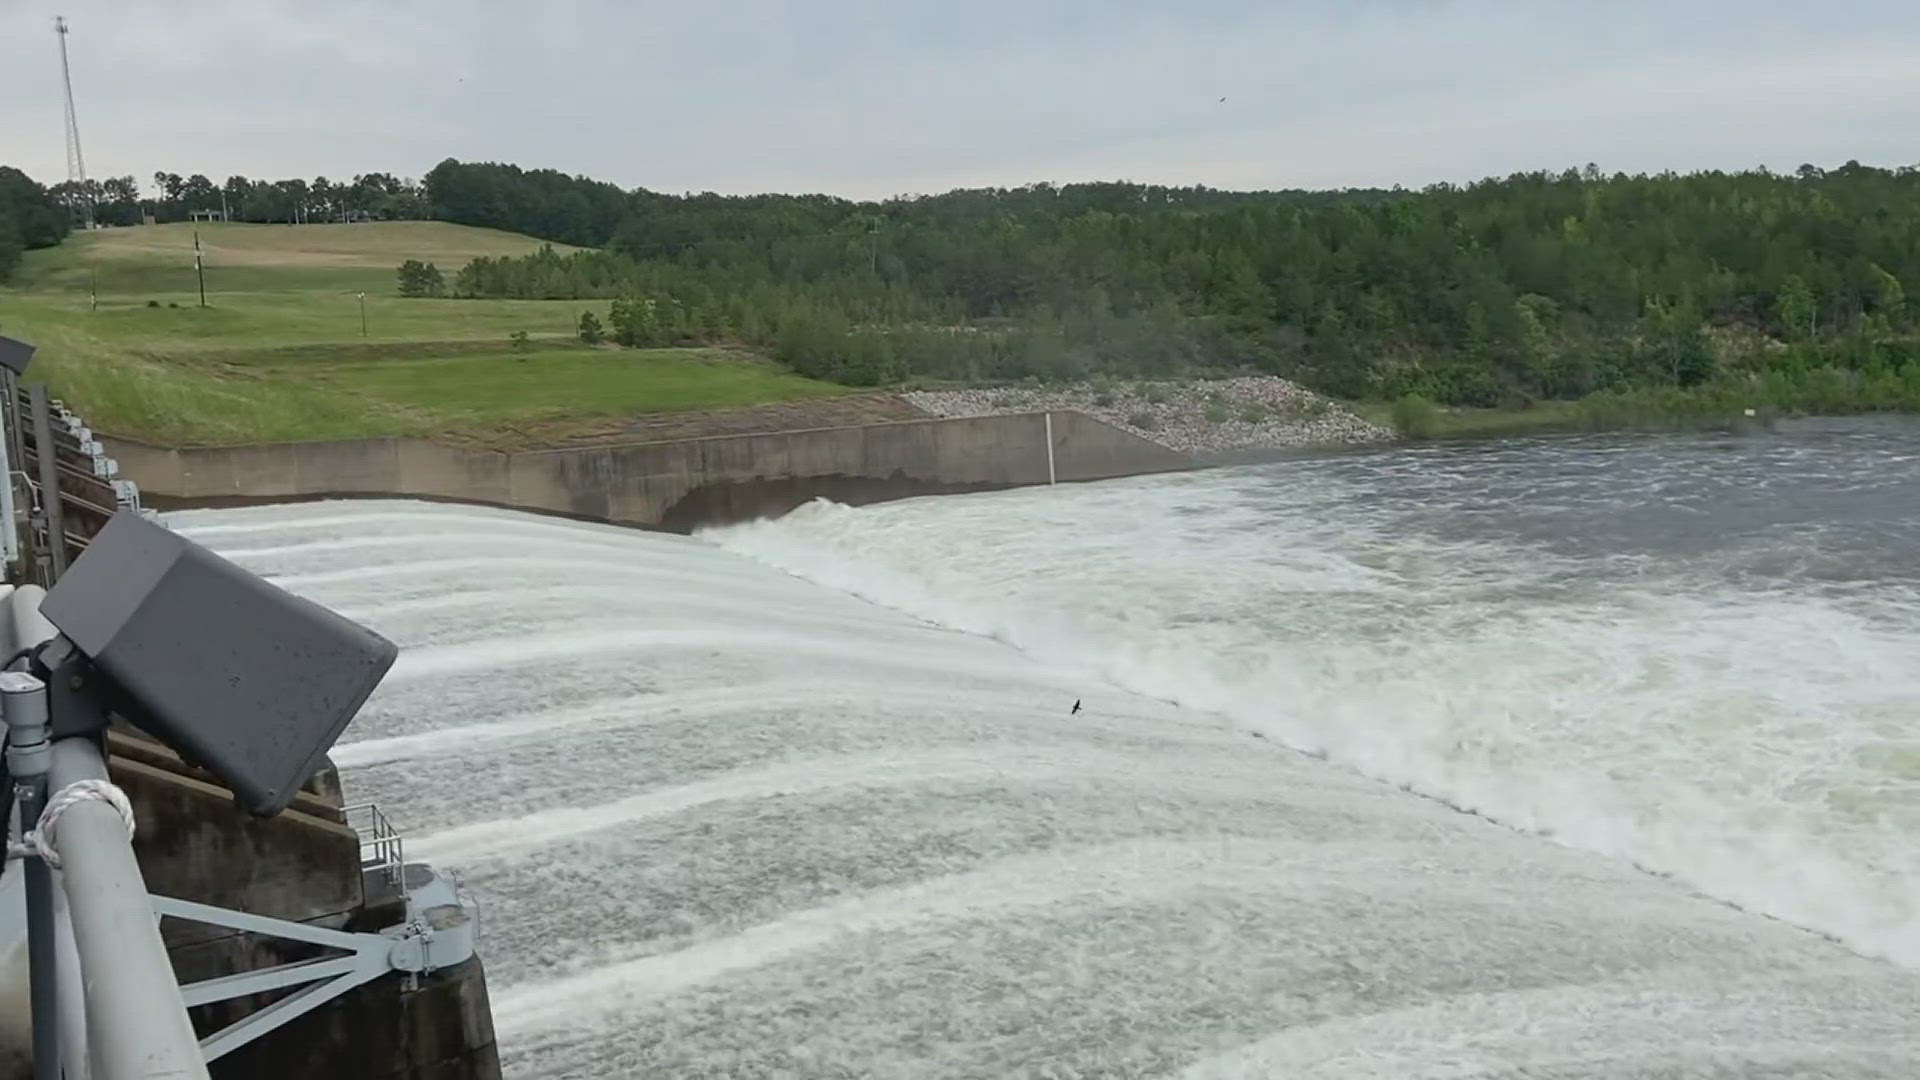 The current total release rate being released from the reservoir this morning was 35,196 CFS.